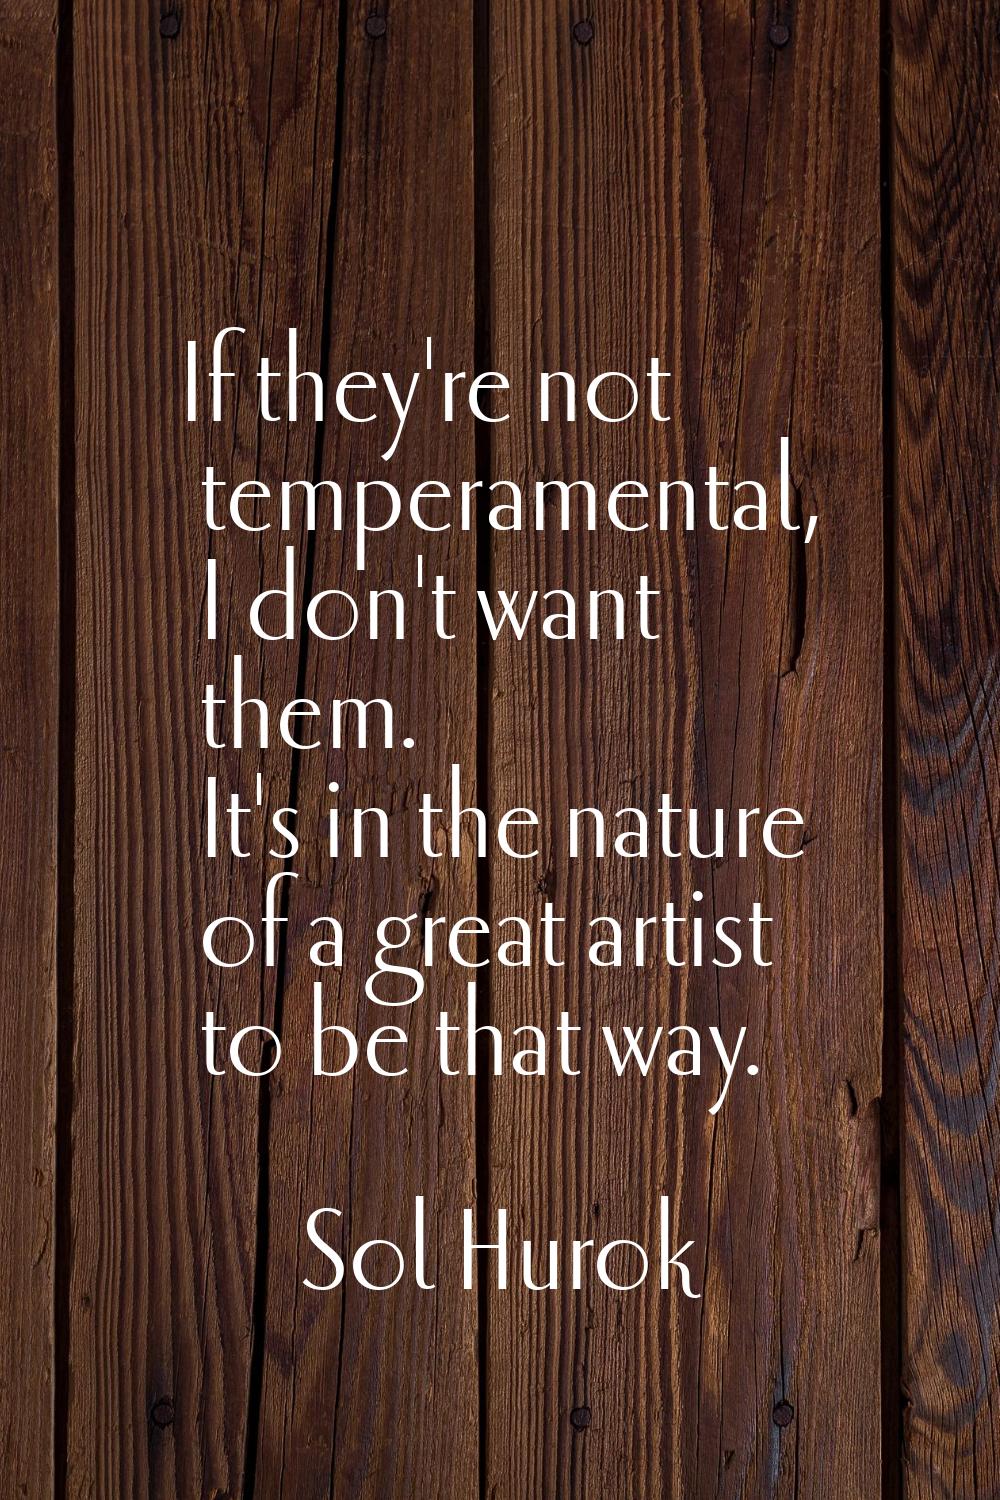 If they're not temperamental, I don't want them. It's in the nature of a great artist to be that wa